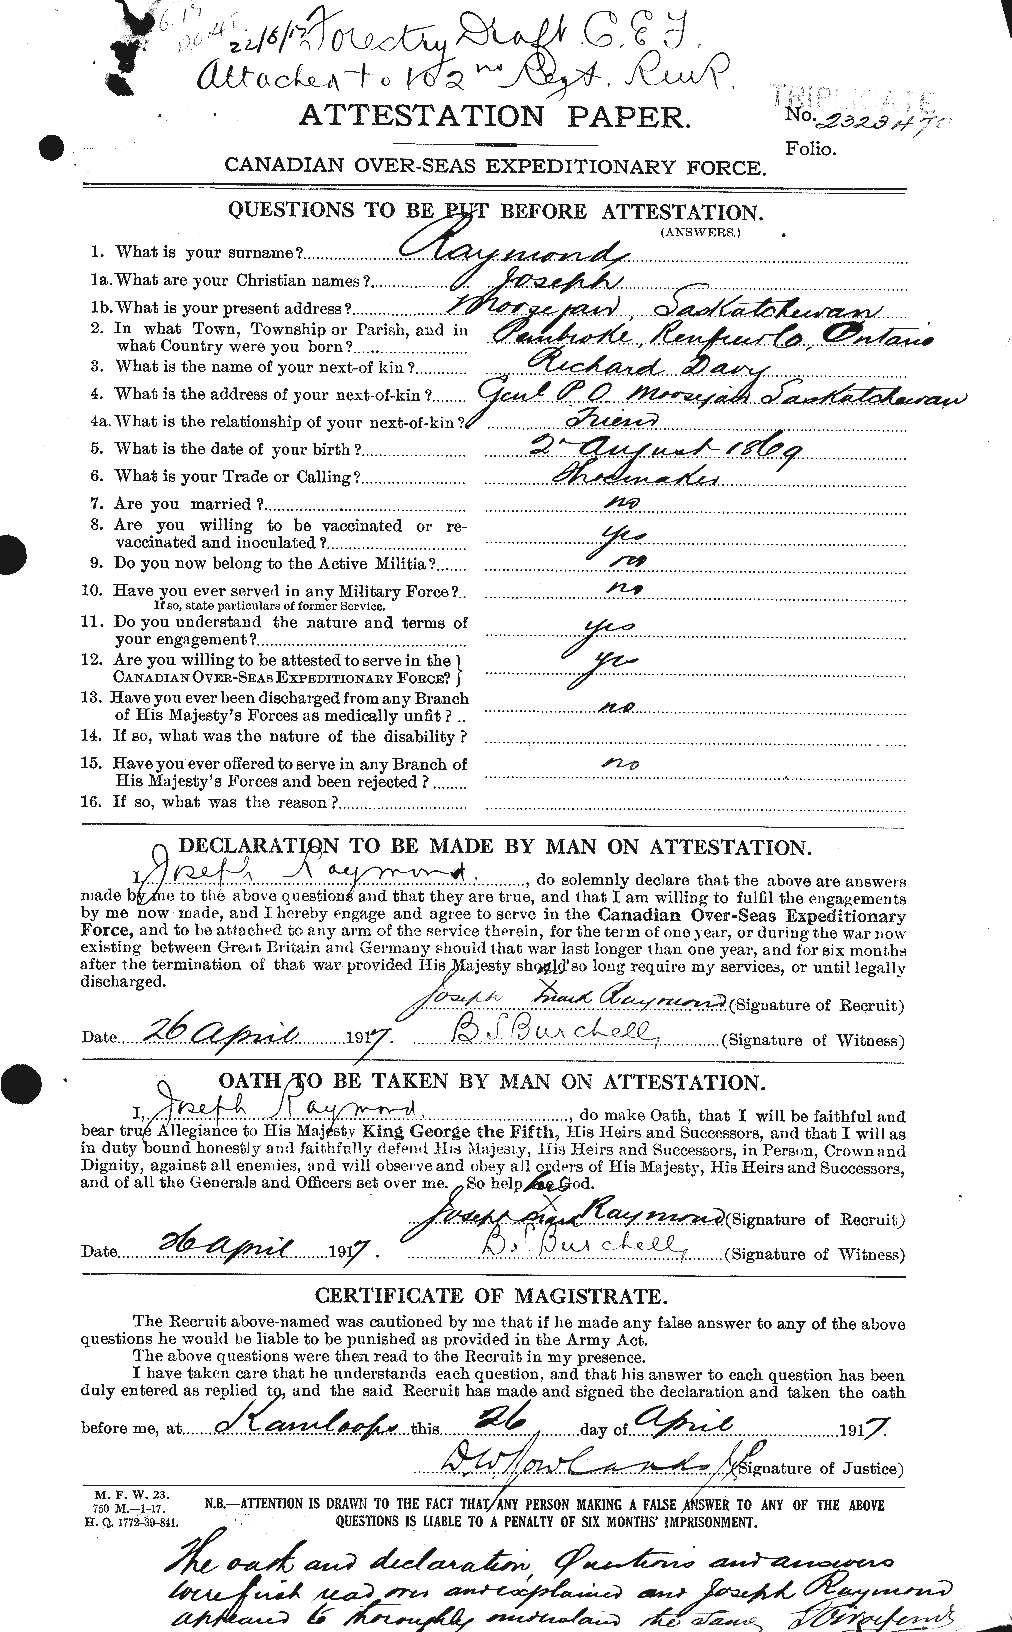 Personnel Records of the First World War - CEF 595396a